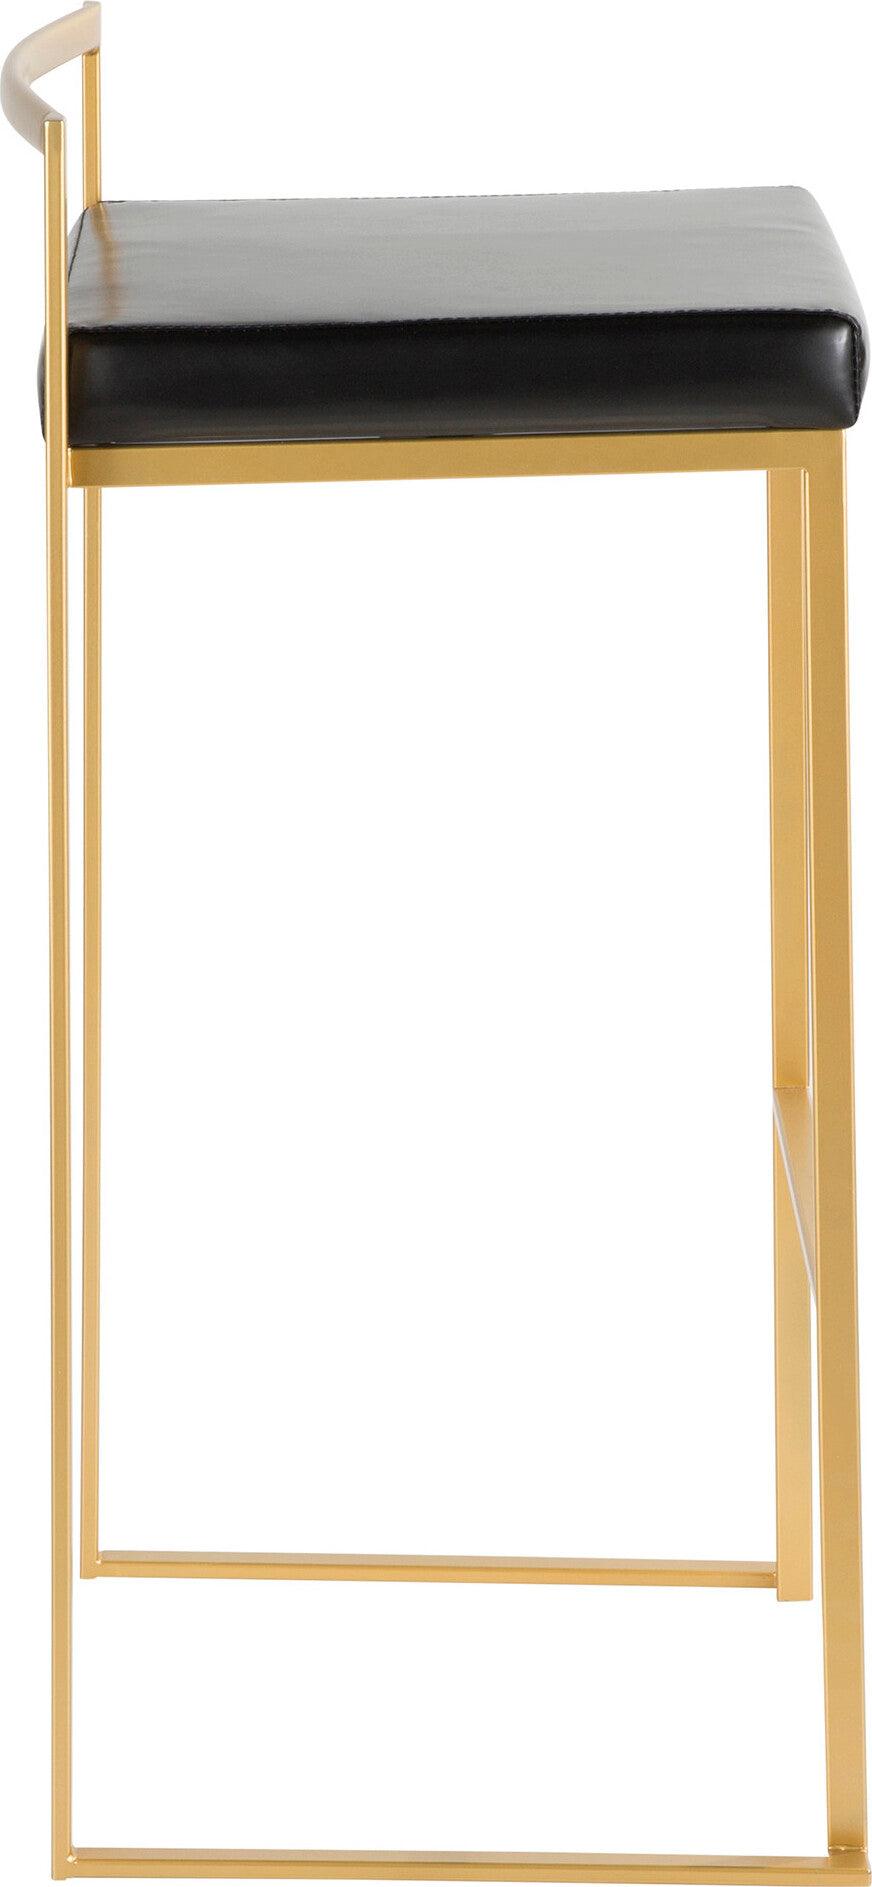 Lumisource Barstools - Fuji Contemporary-Glam Barstool in Gold with Black Faux Leather (Set of 2)